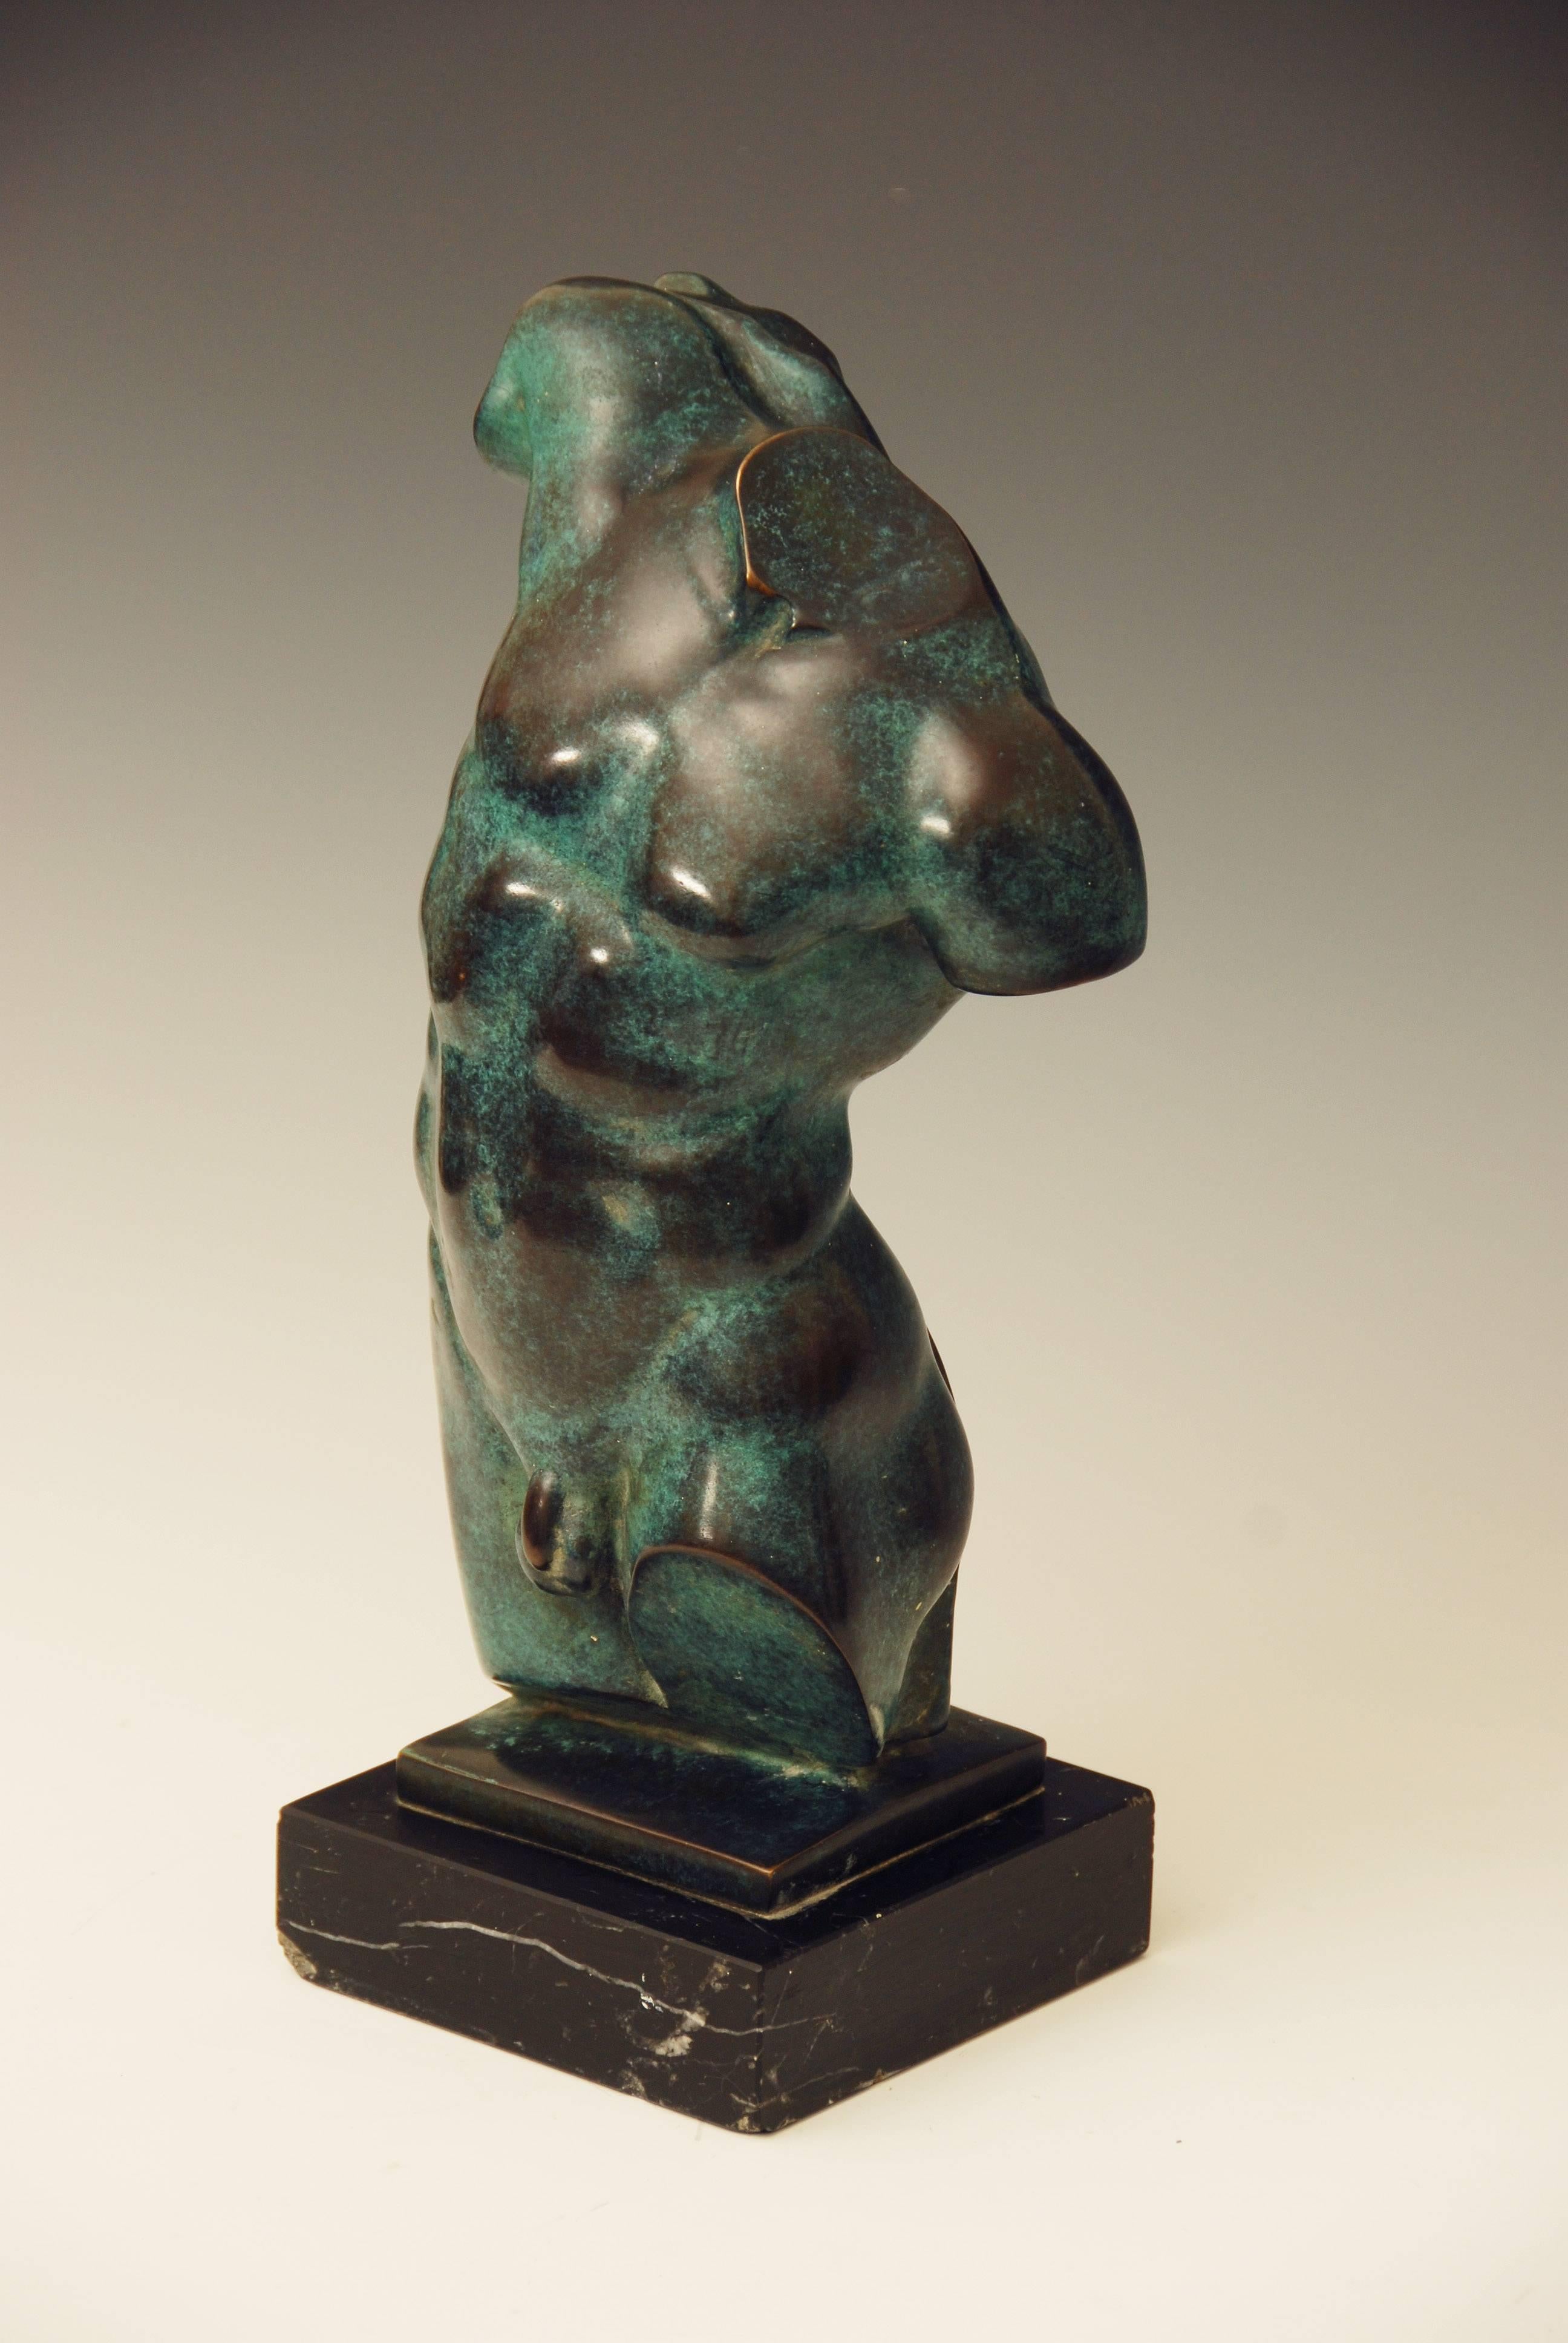 Classical patinated bronze male torso sculpture on marble base, 20th century.
Italian, probably from circa 1970.
Very solid heavy piece, weighing 10 kilos or 22 lbs.
Measures: 15 inches high.